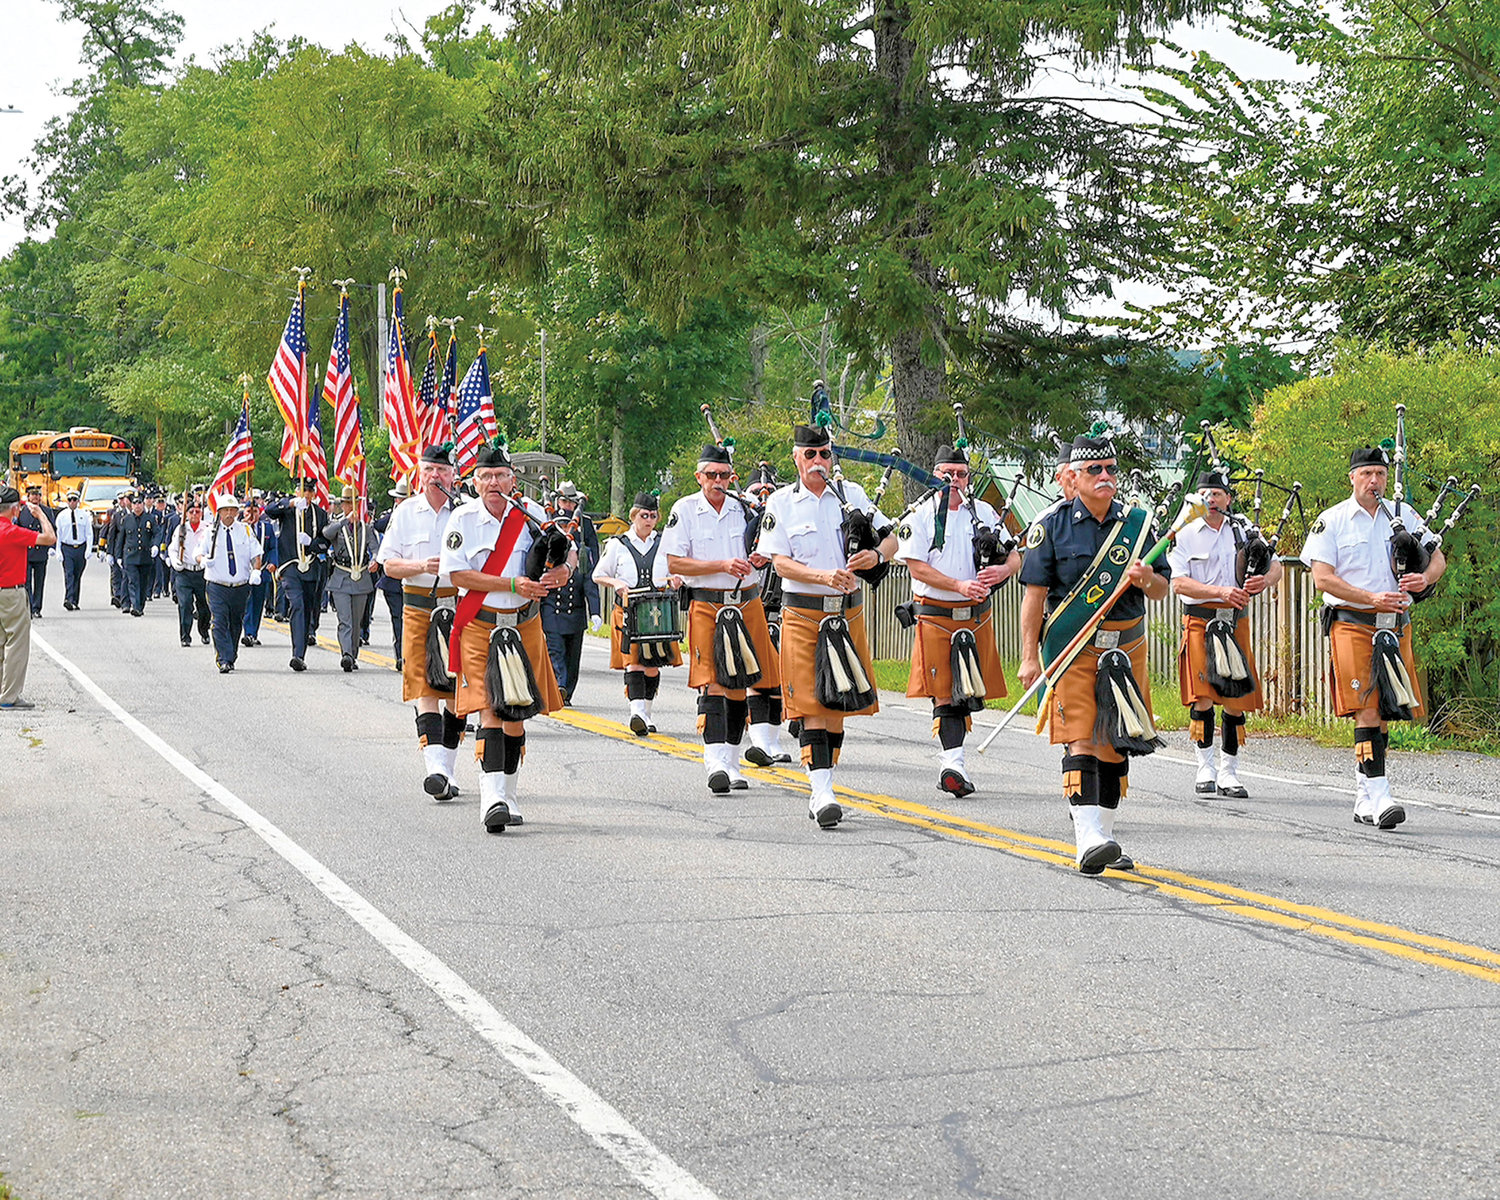 Led by bagpipers, firefighters, police officers and other first responders process to Mass at St. John the Evangelist Church on East Lake Boulevard in Mahopac Sept. 12 to mark the 20th anniversary of 9/11. The pastor, Father Philip Caruso, was principal celebrant and homilist.